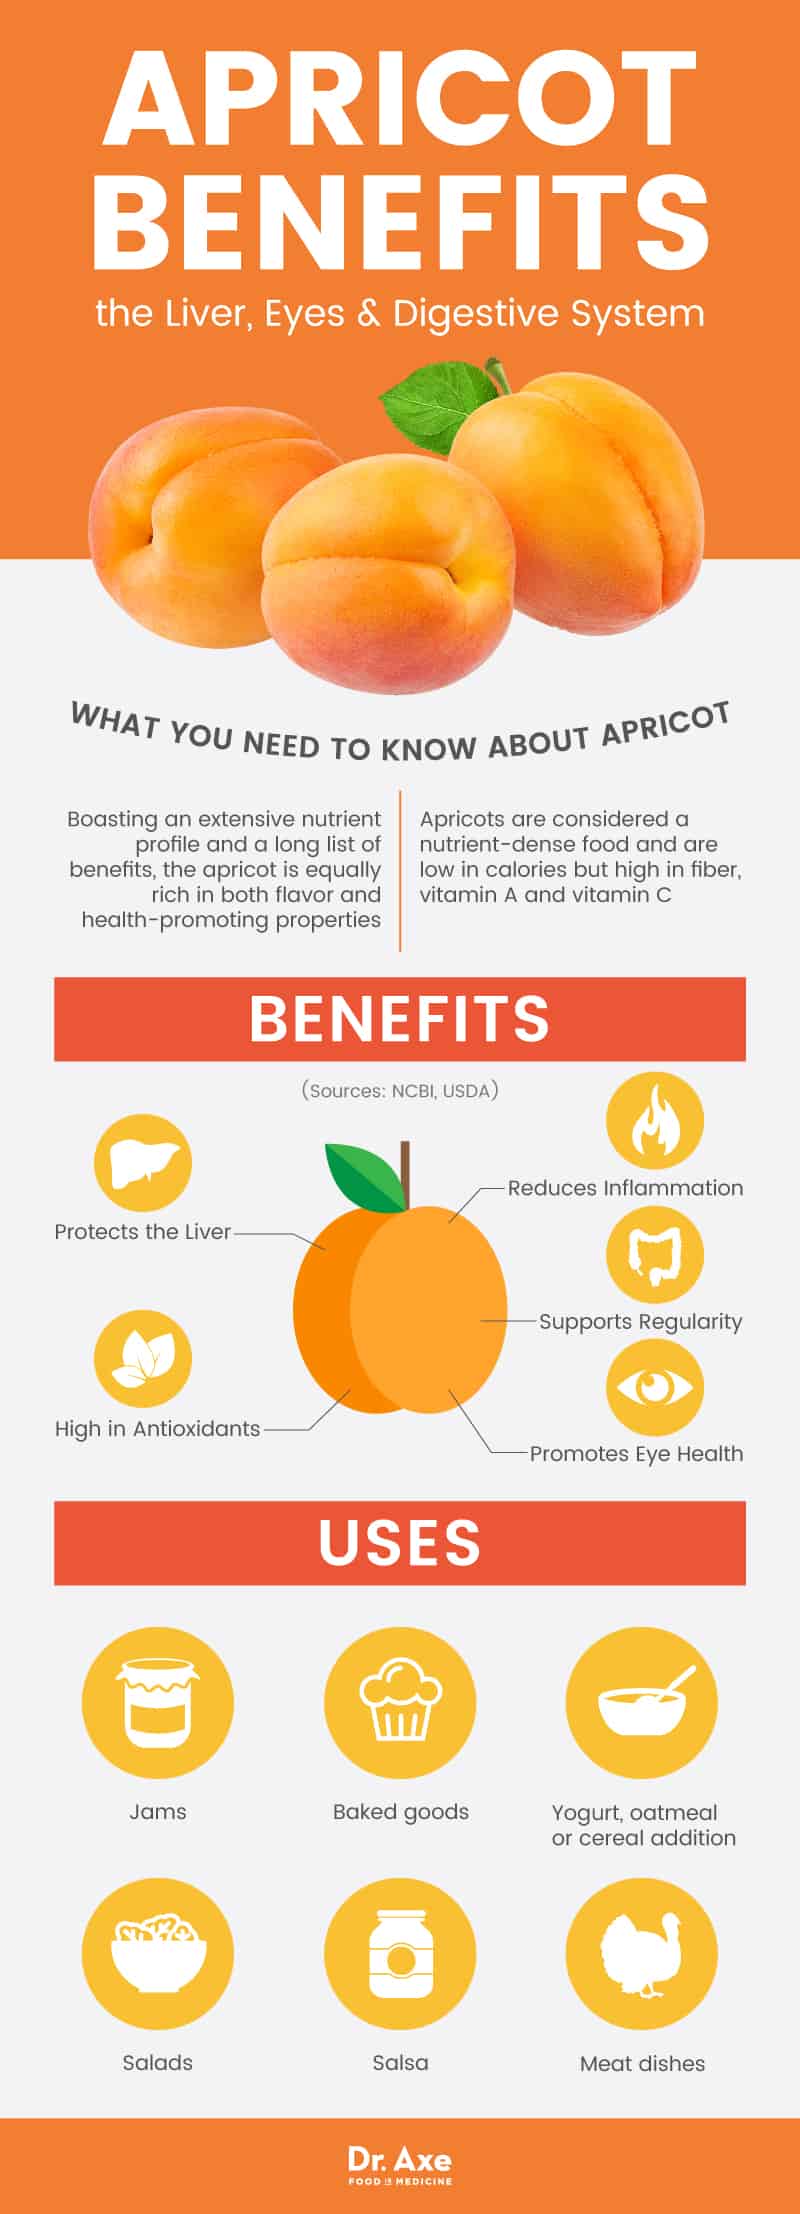 Apricot benefits - Dr. Axe